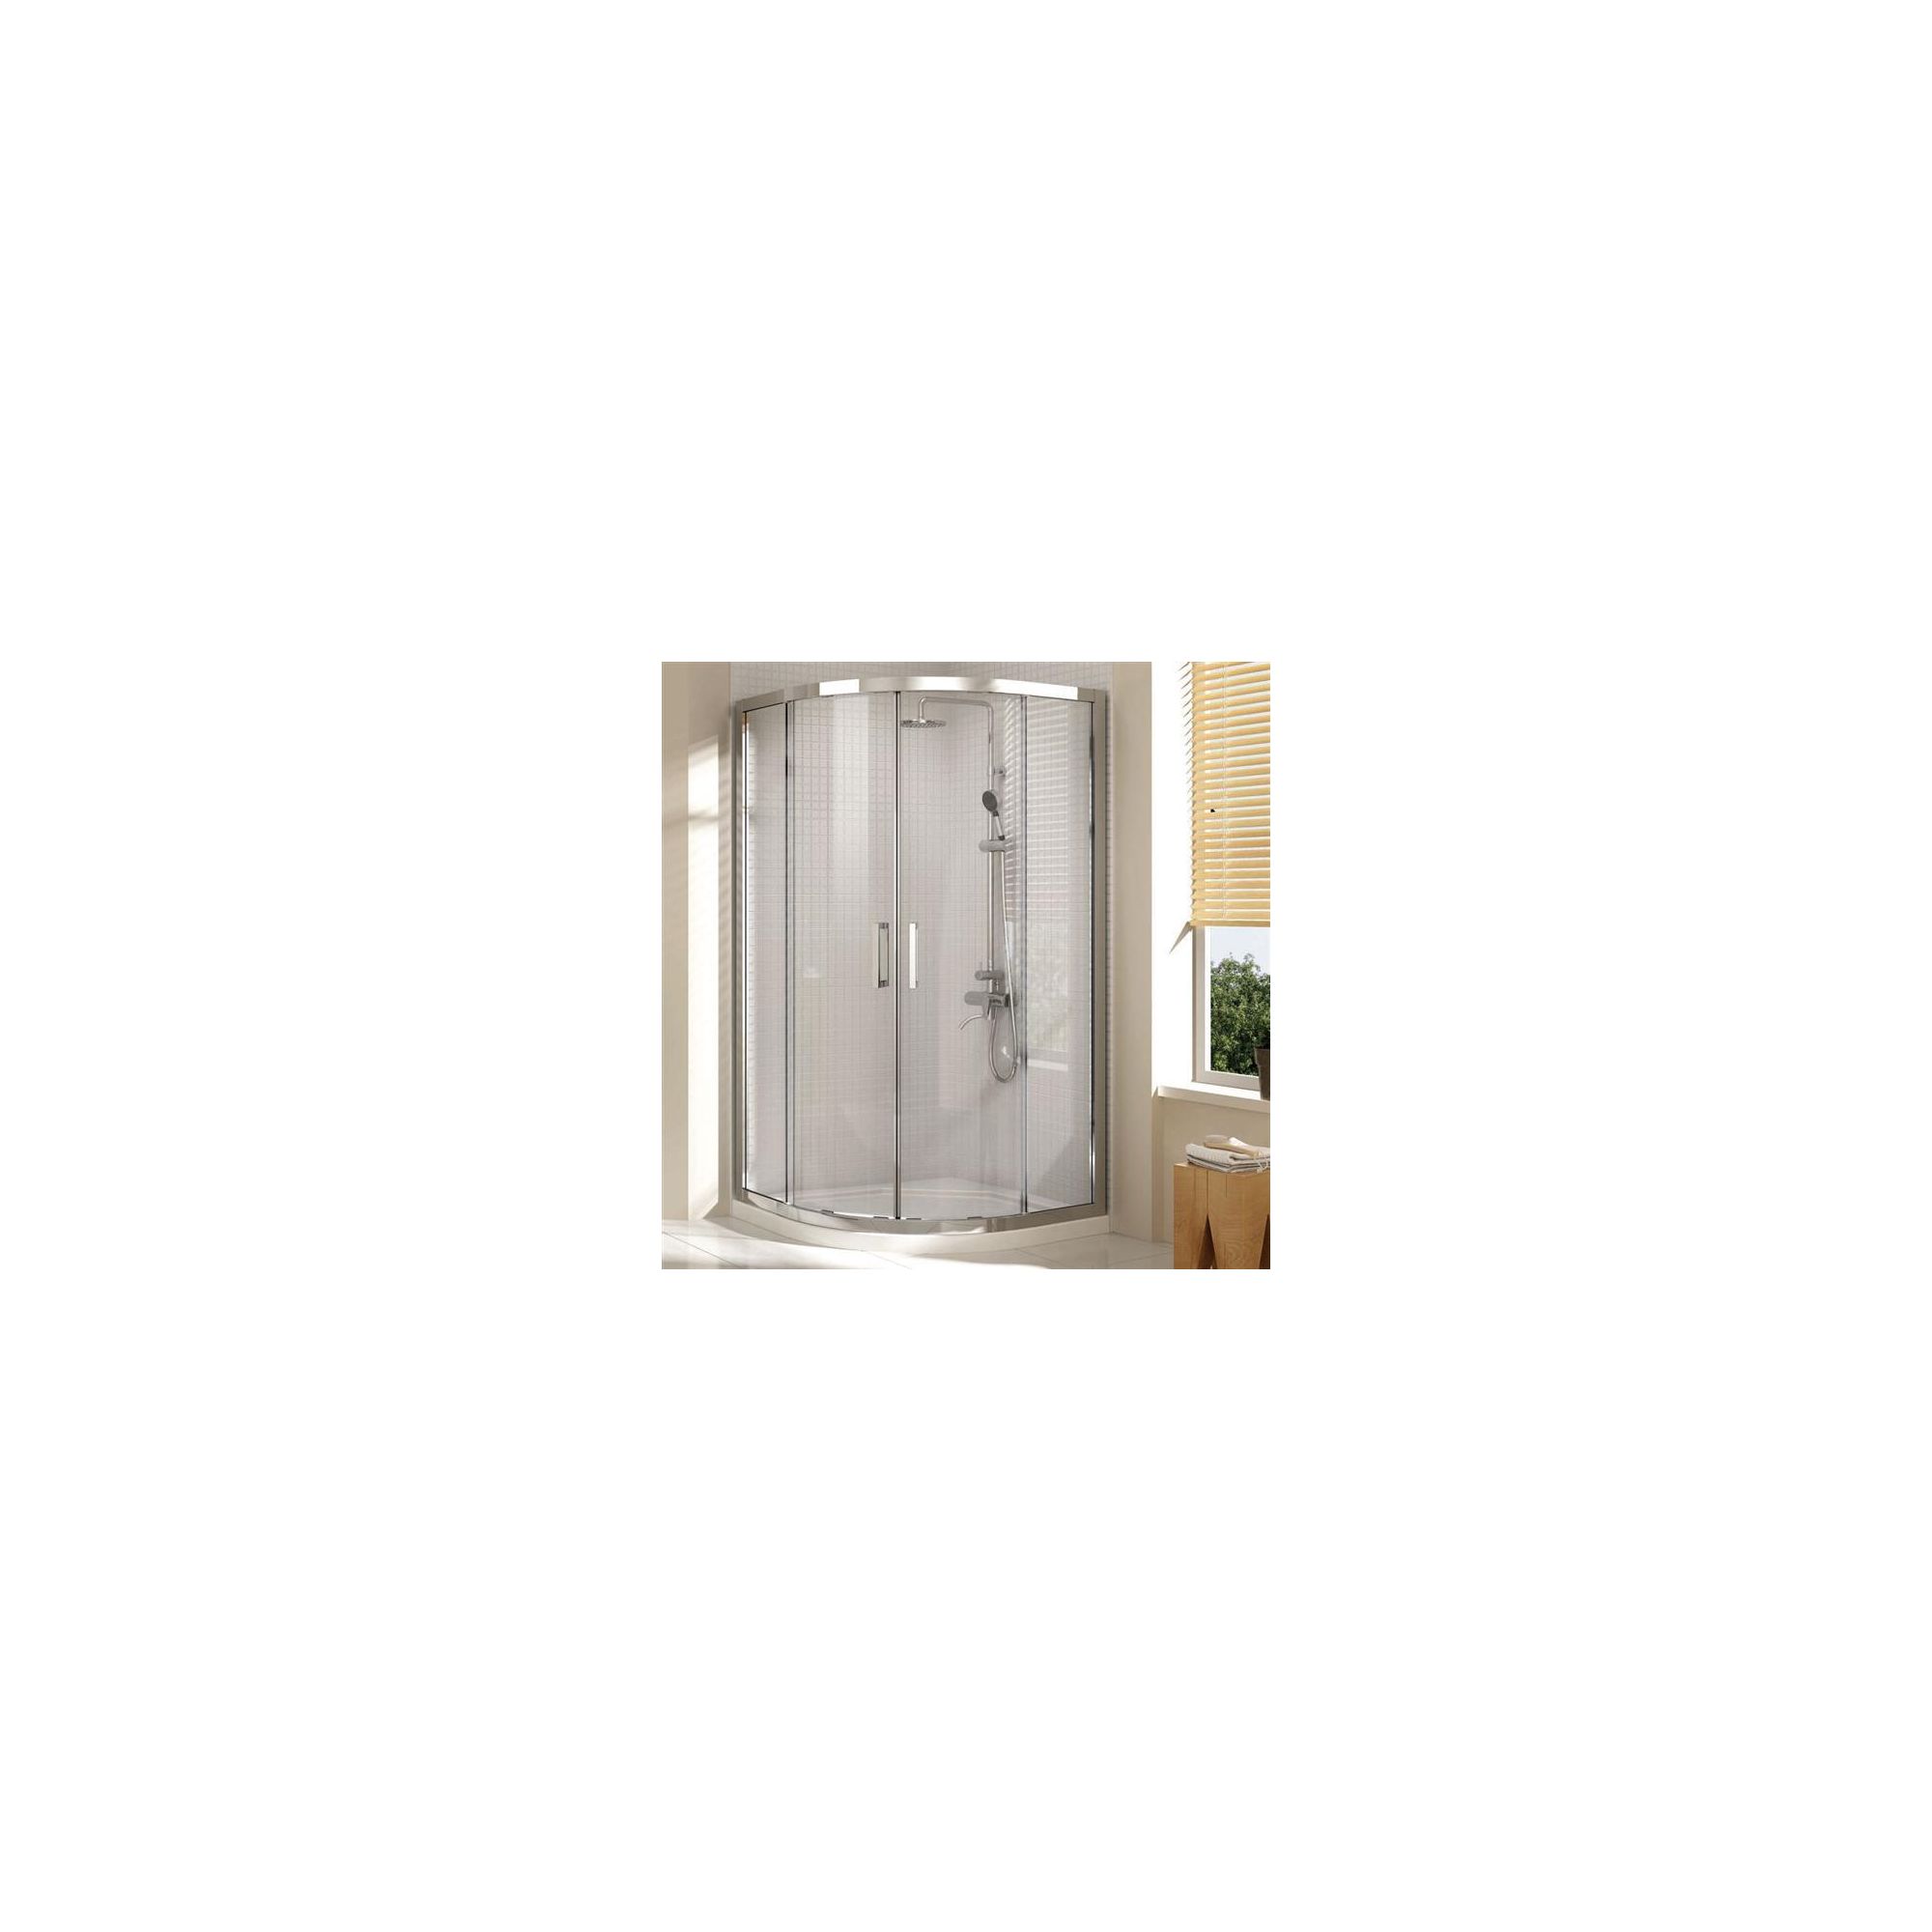 Merlyn Vivid Eight Quadrant Shower Enclosure, 900mm x 900mm, Low Profile Tray, 8mm Glass at Tesco Direct